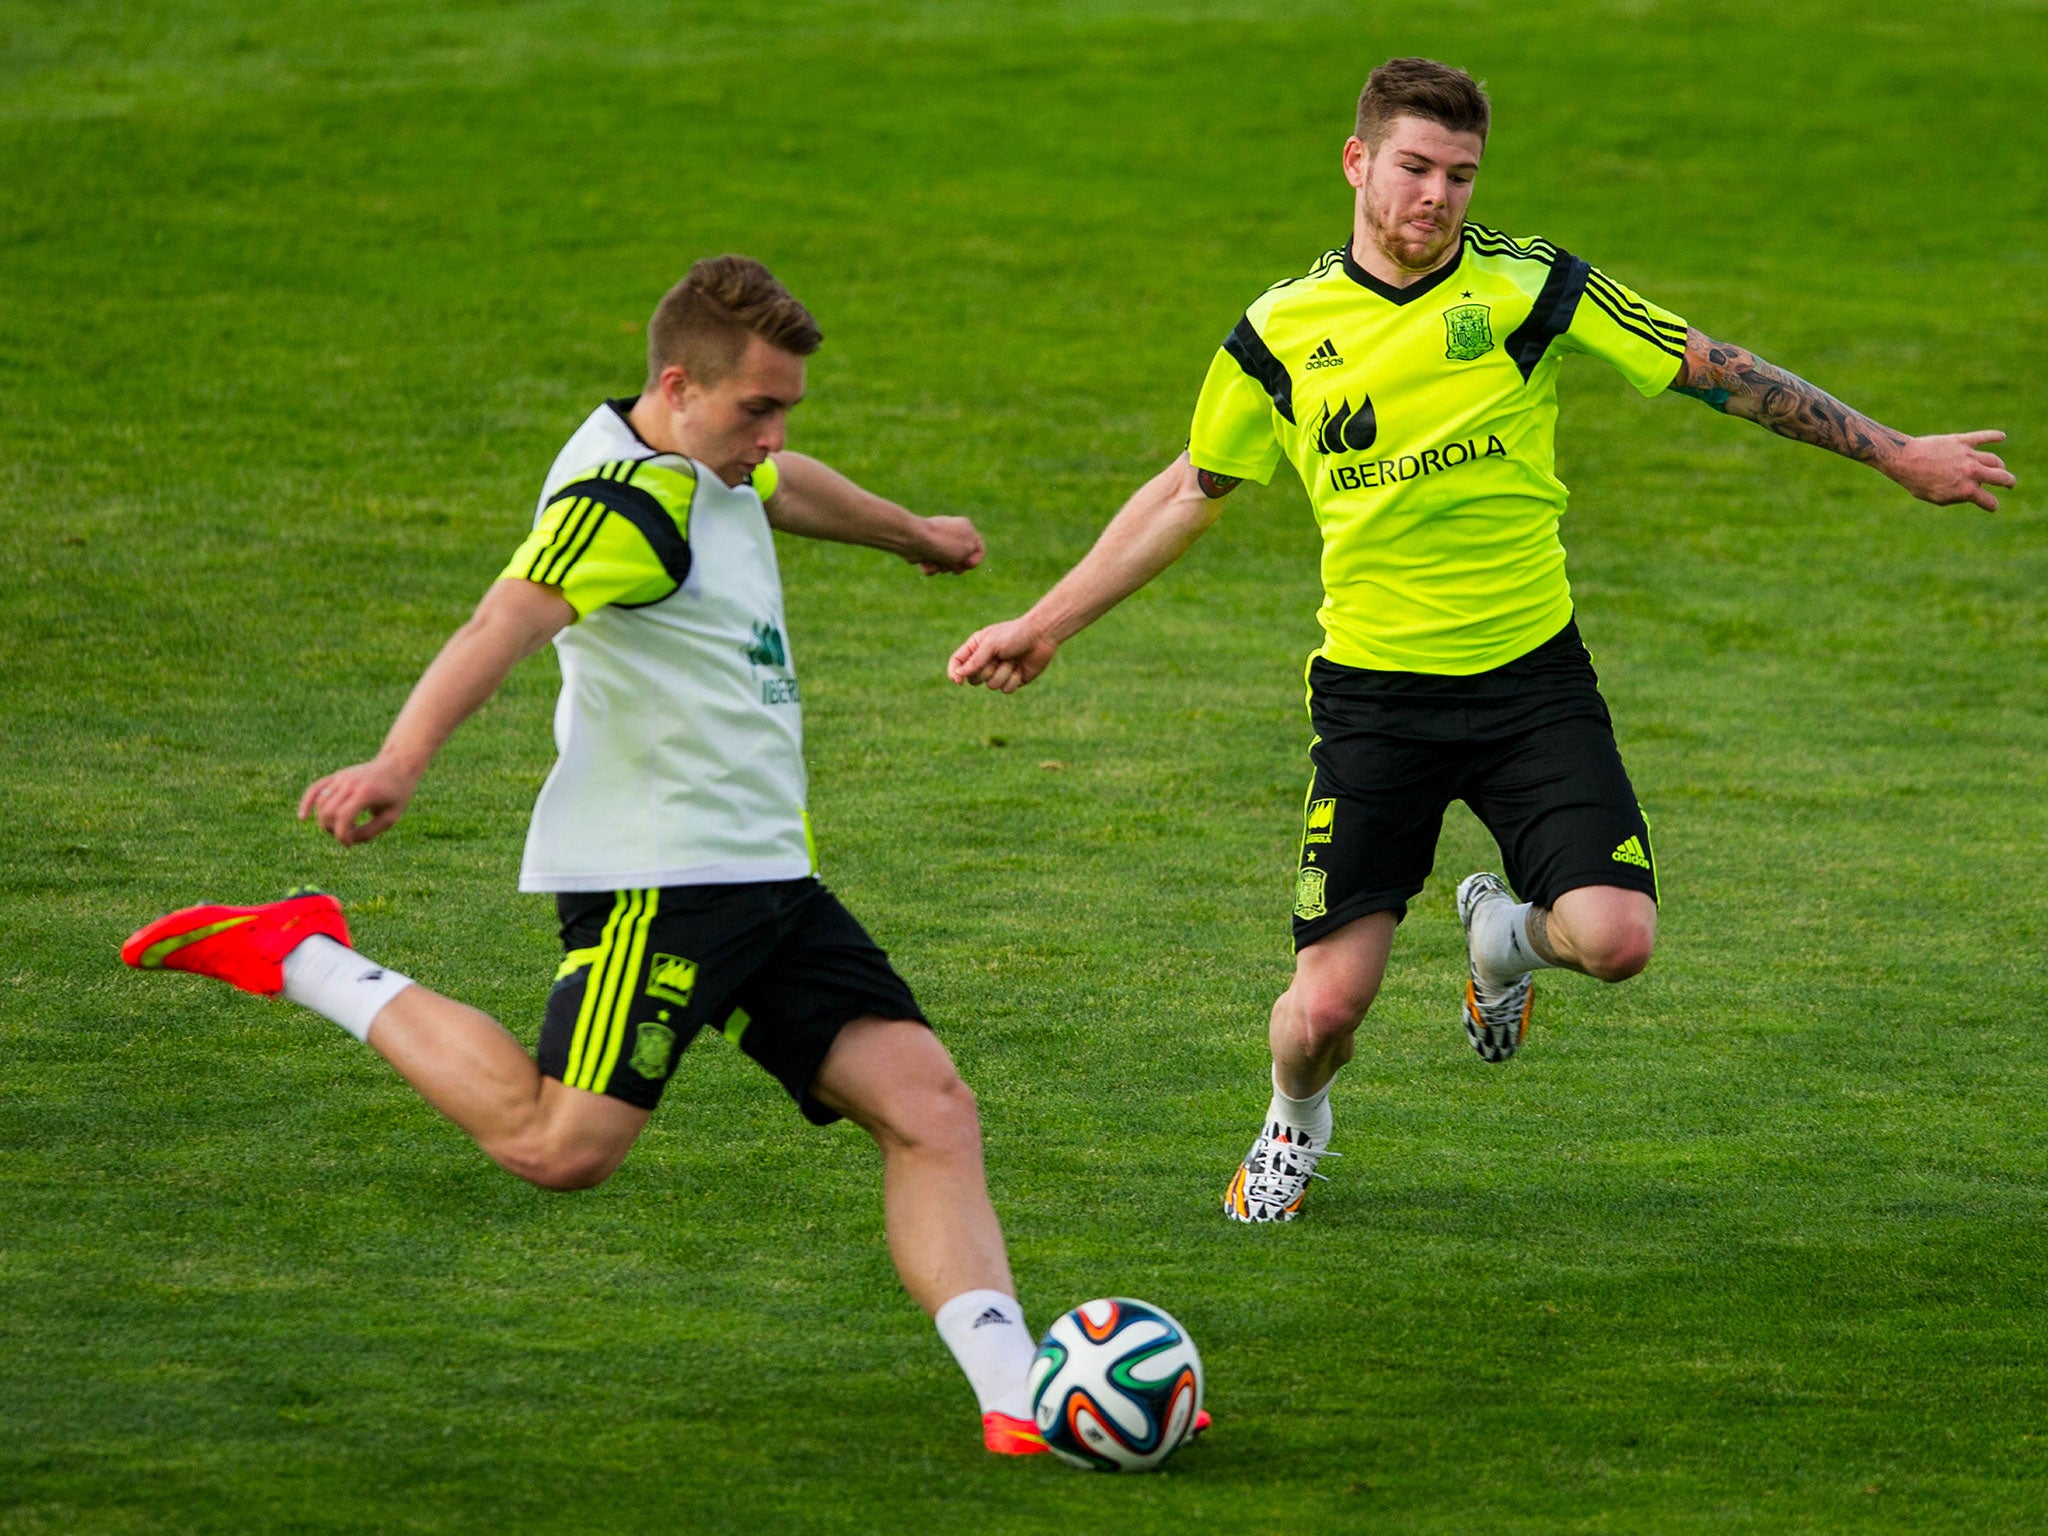 Gerard Deulofeu of Spain duels for the ball with Alberto Moreno of Spain during a training session at Ciudad del Futbol